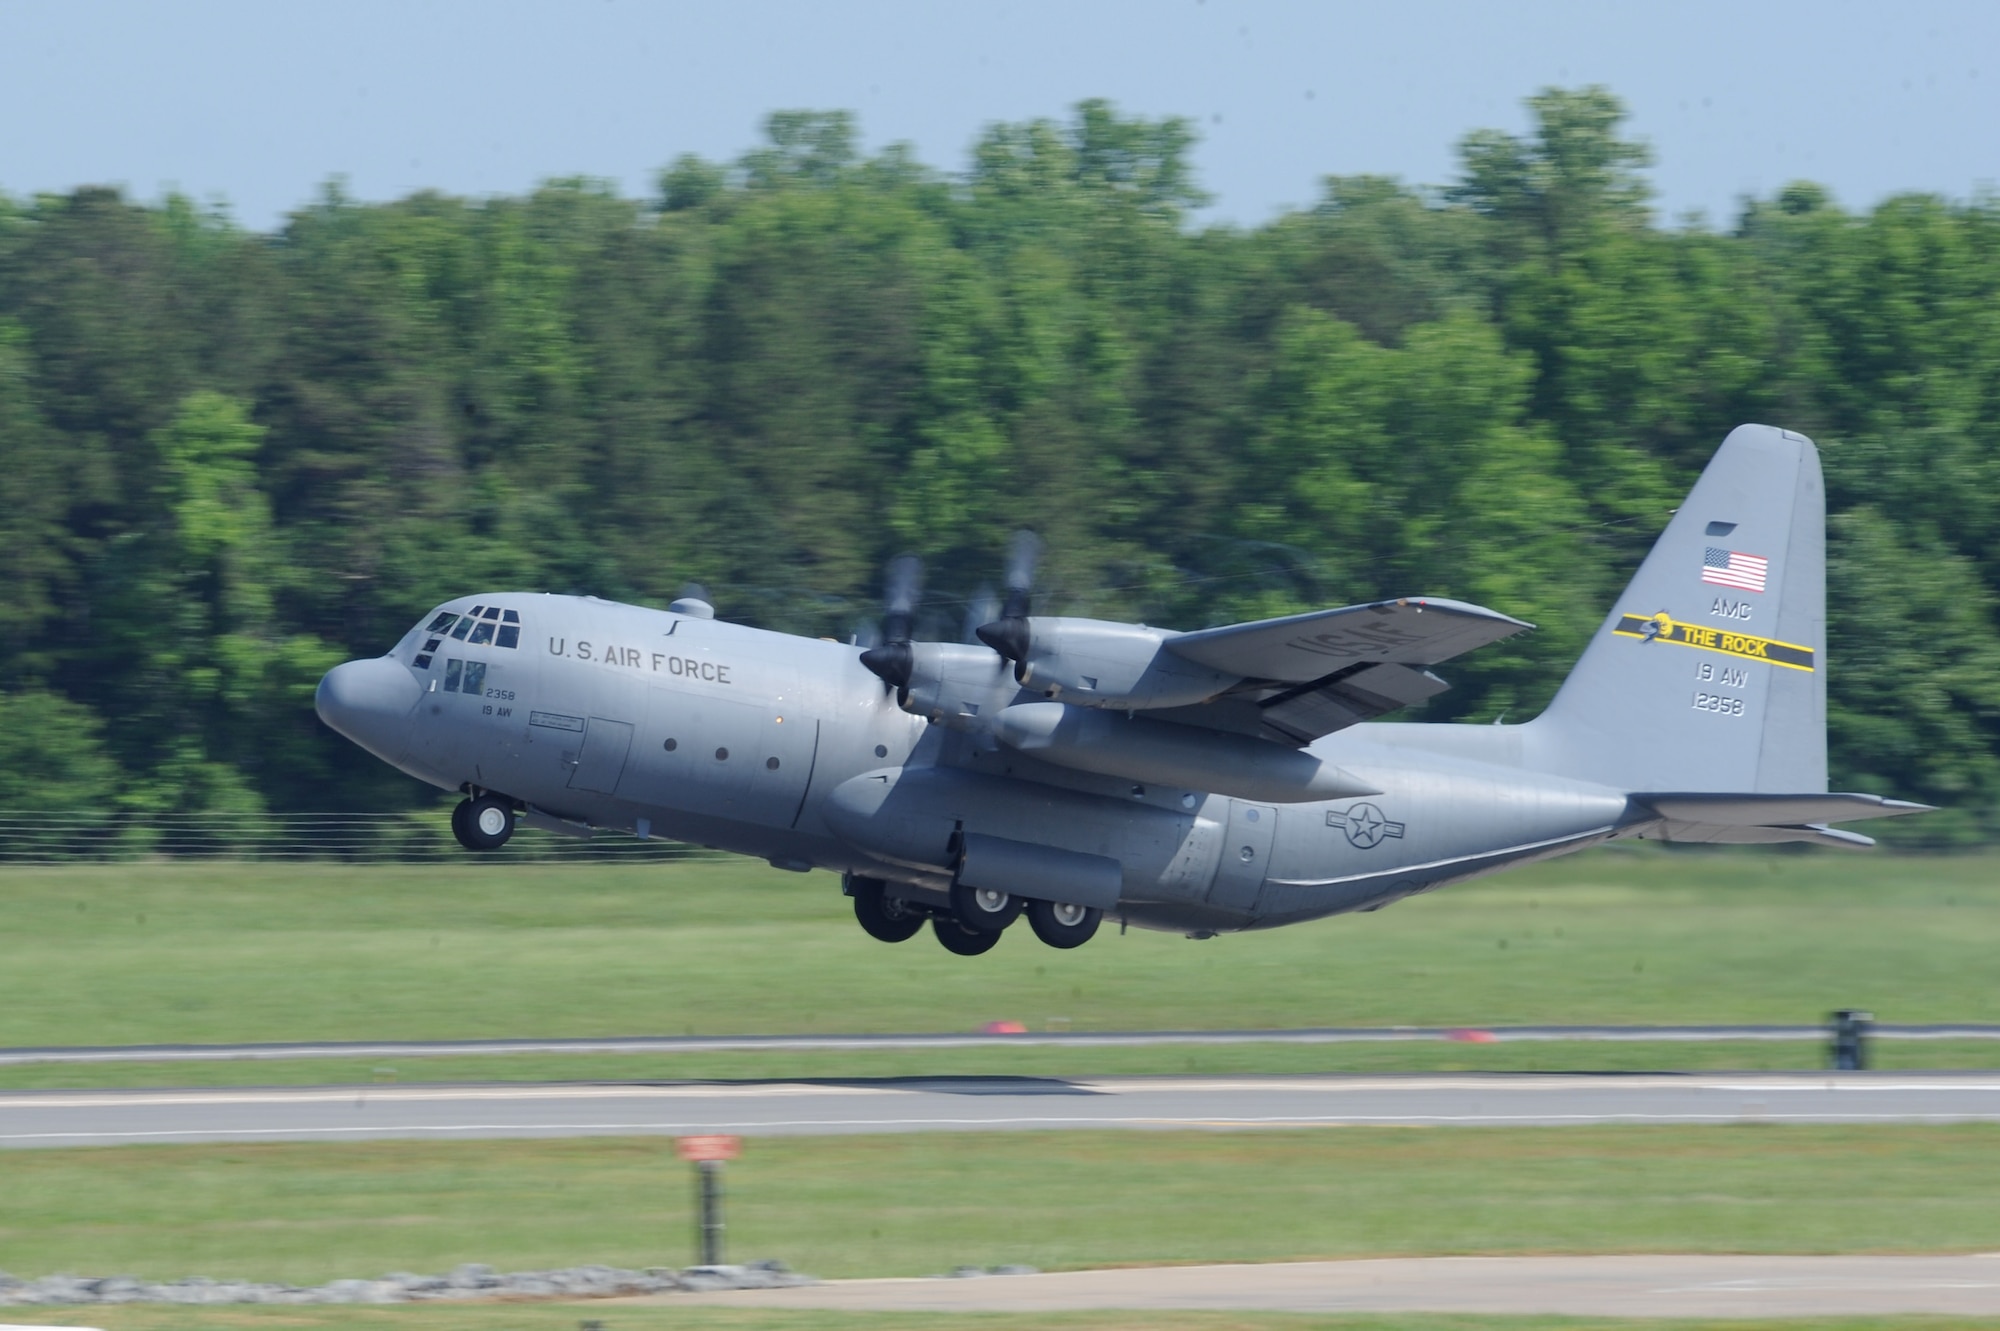 C-130E 61-2358 takes off from the base flight line for the last time, May 1, 2012, at Little Rock Air Force Base, Ark. (U.S. Air Force photo by Tech. Sgt. Chad Chisholm)